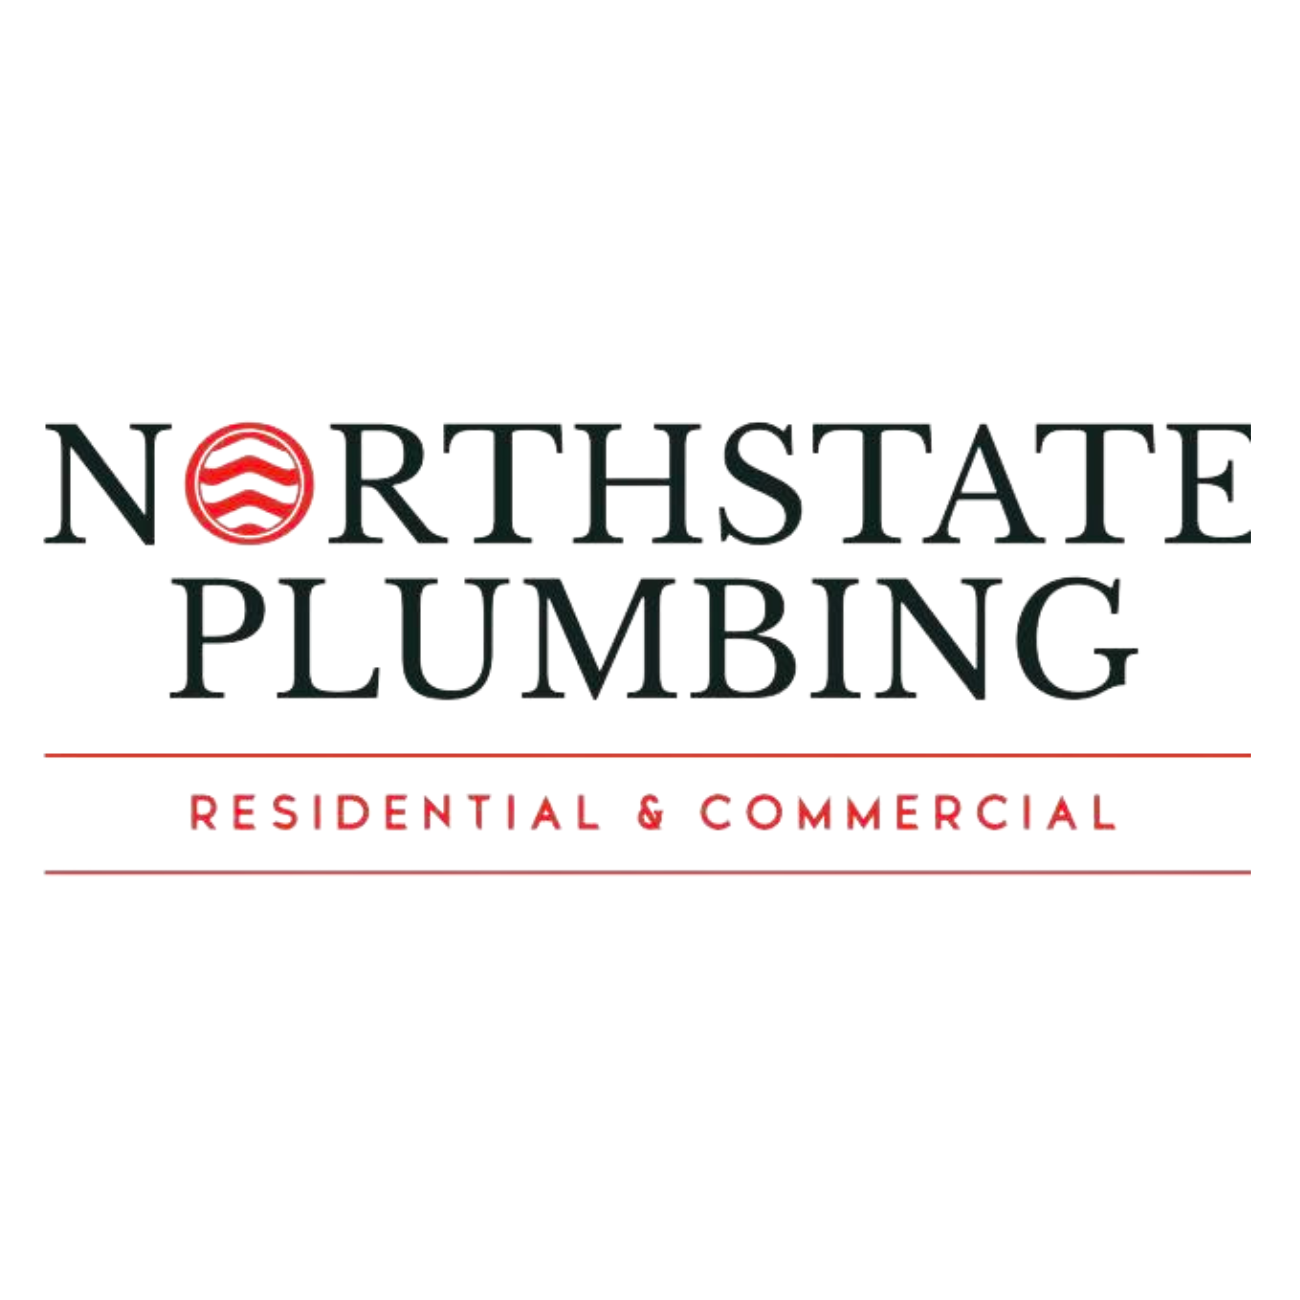 Northstate Plumbing - Kernersville, NC - (336)497-4114 | ShowMeLocal.com